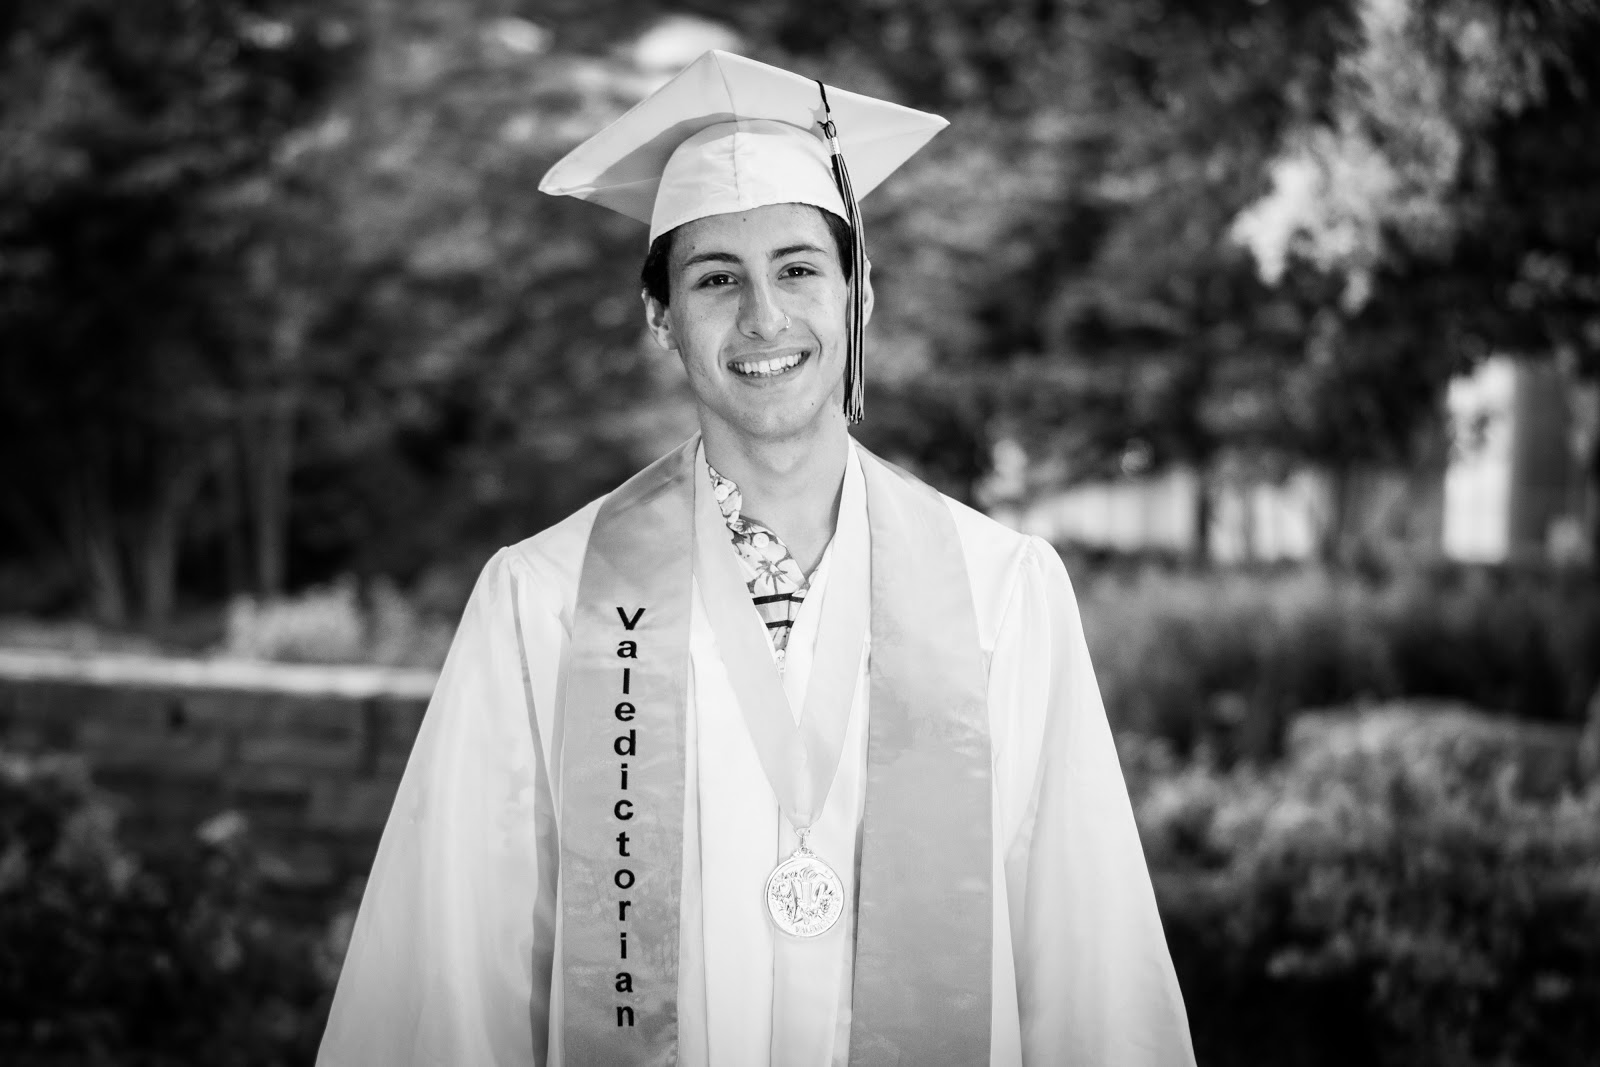 image of Bobby Wood in graduation gown